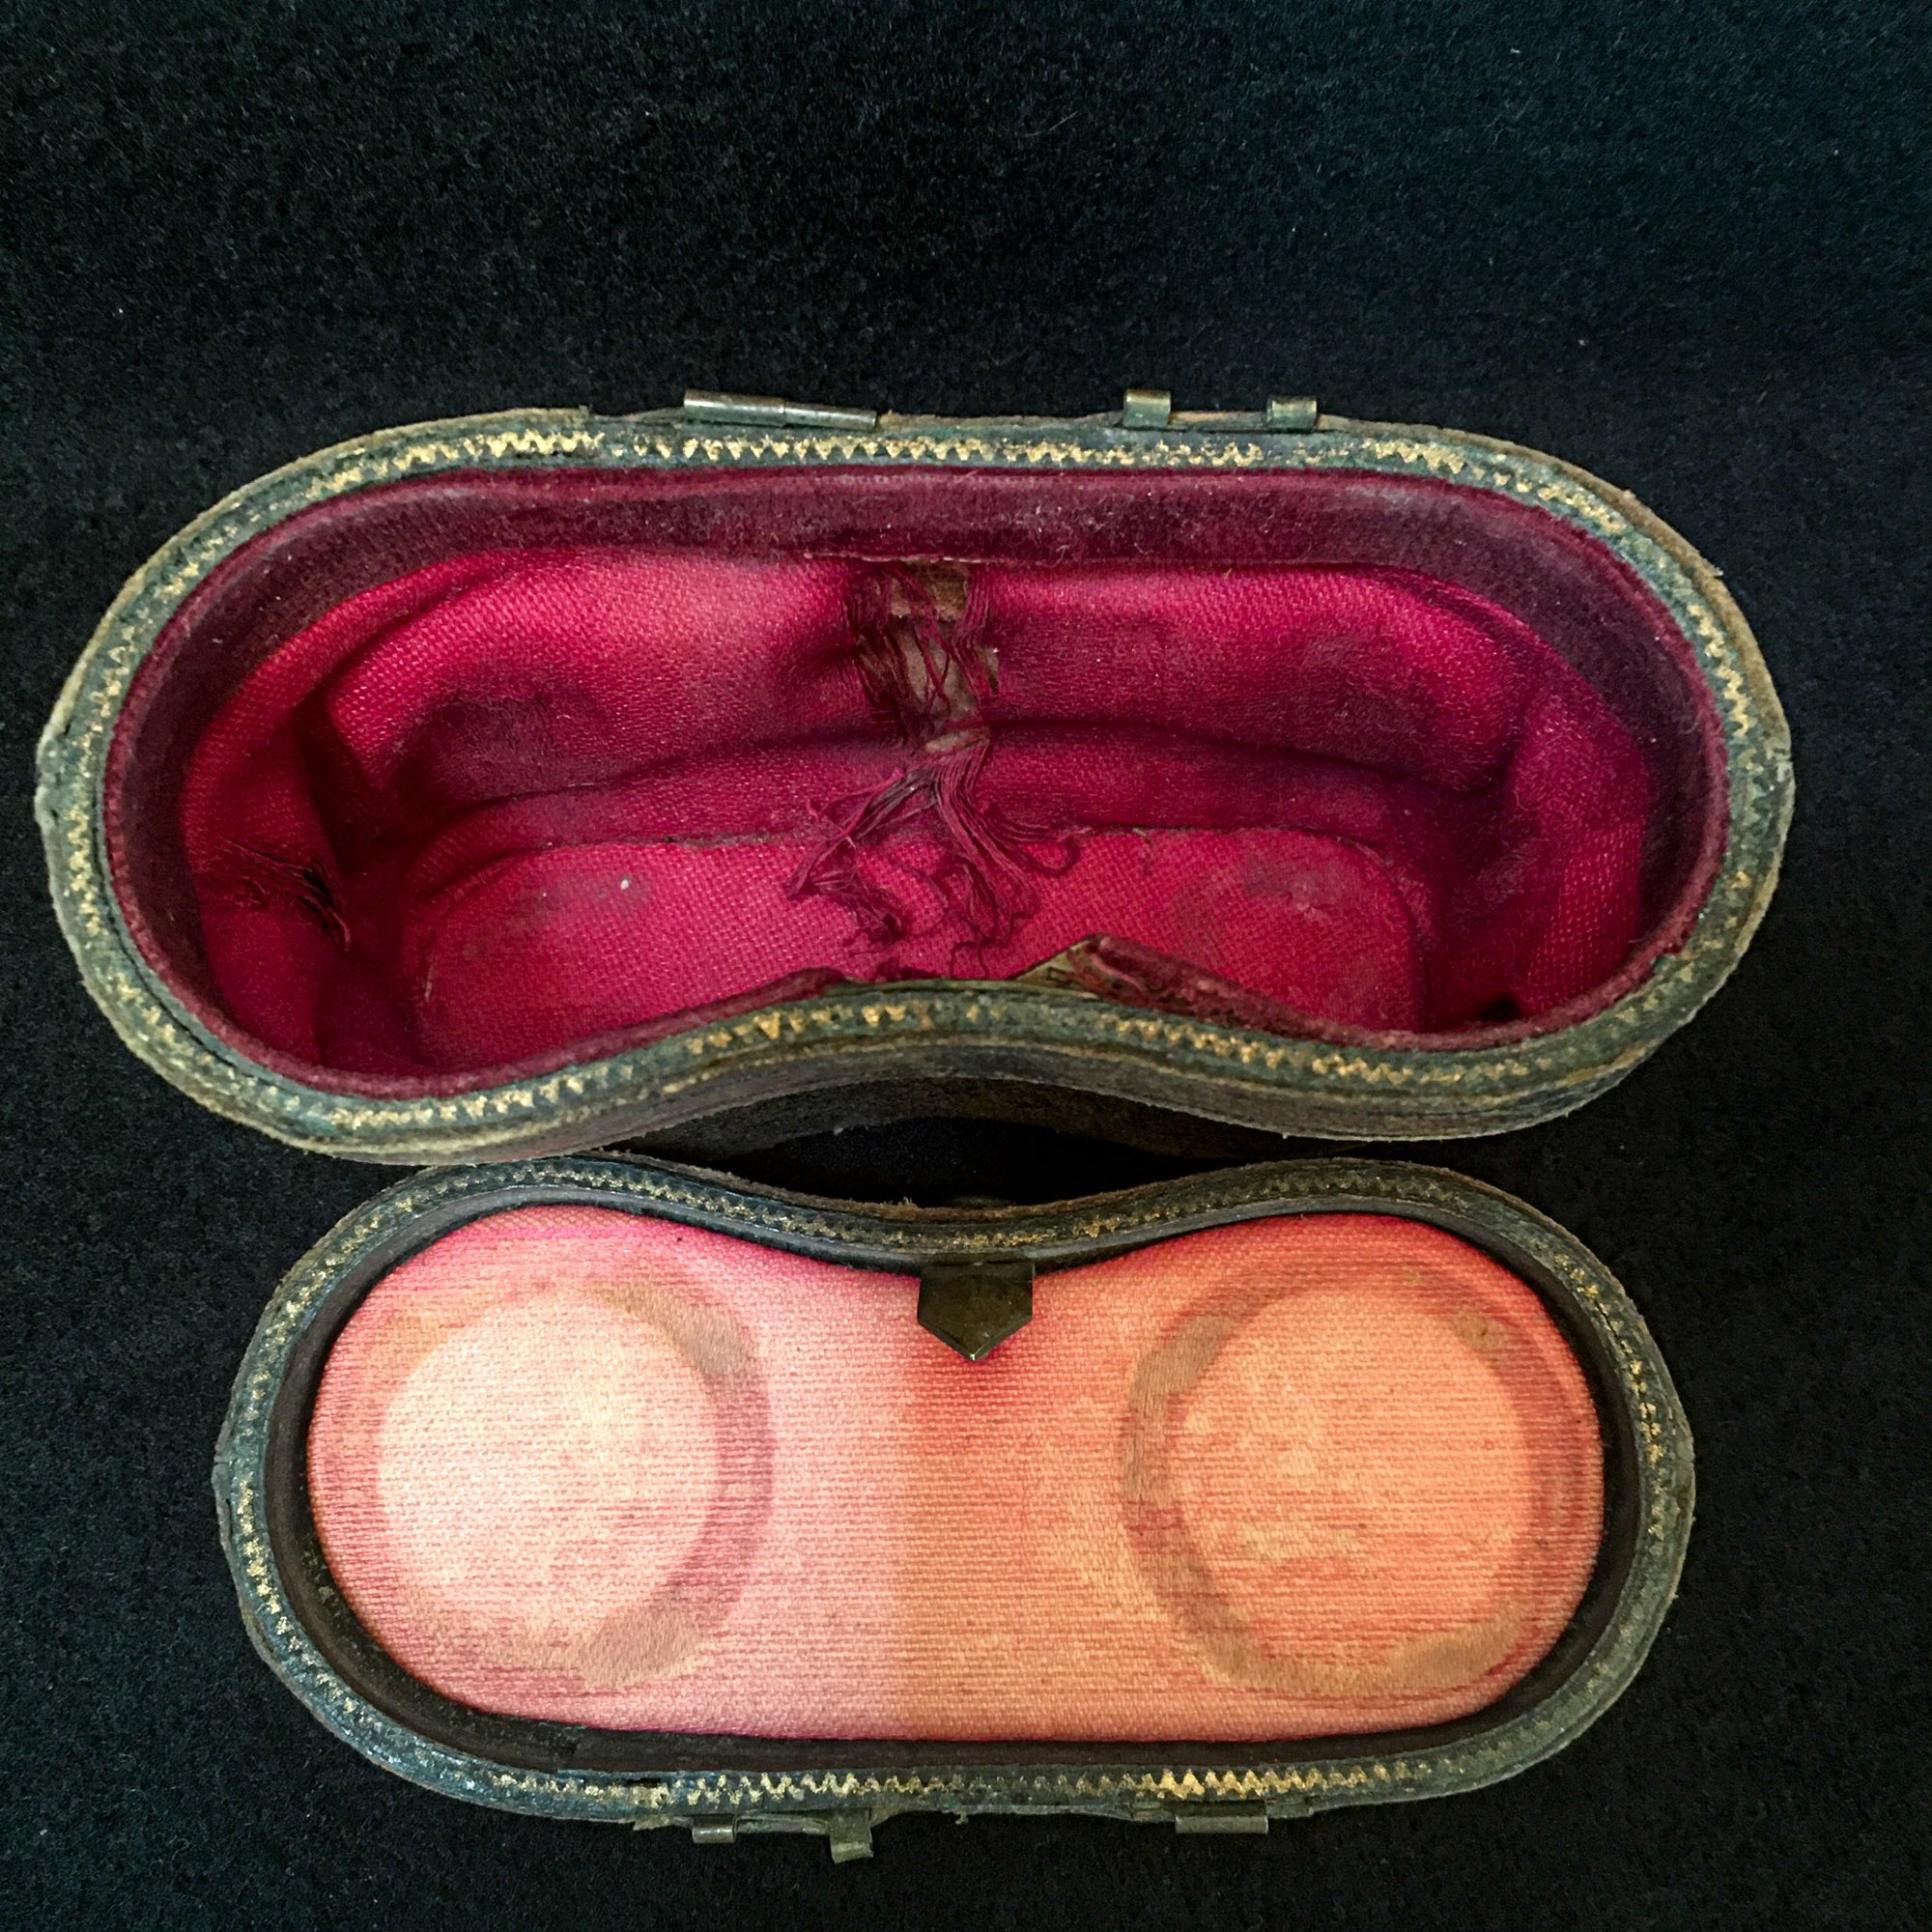 Early 1900’s Mother of Pearl and Brass Opera Glasses with Original Leather, Satin and Velvet Case